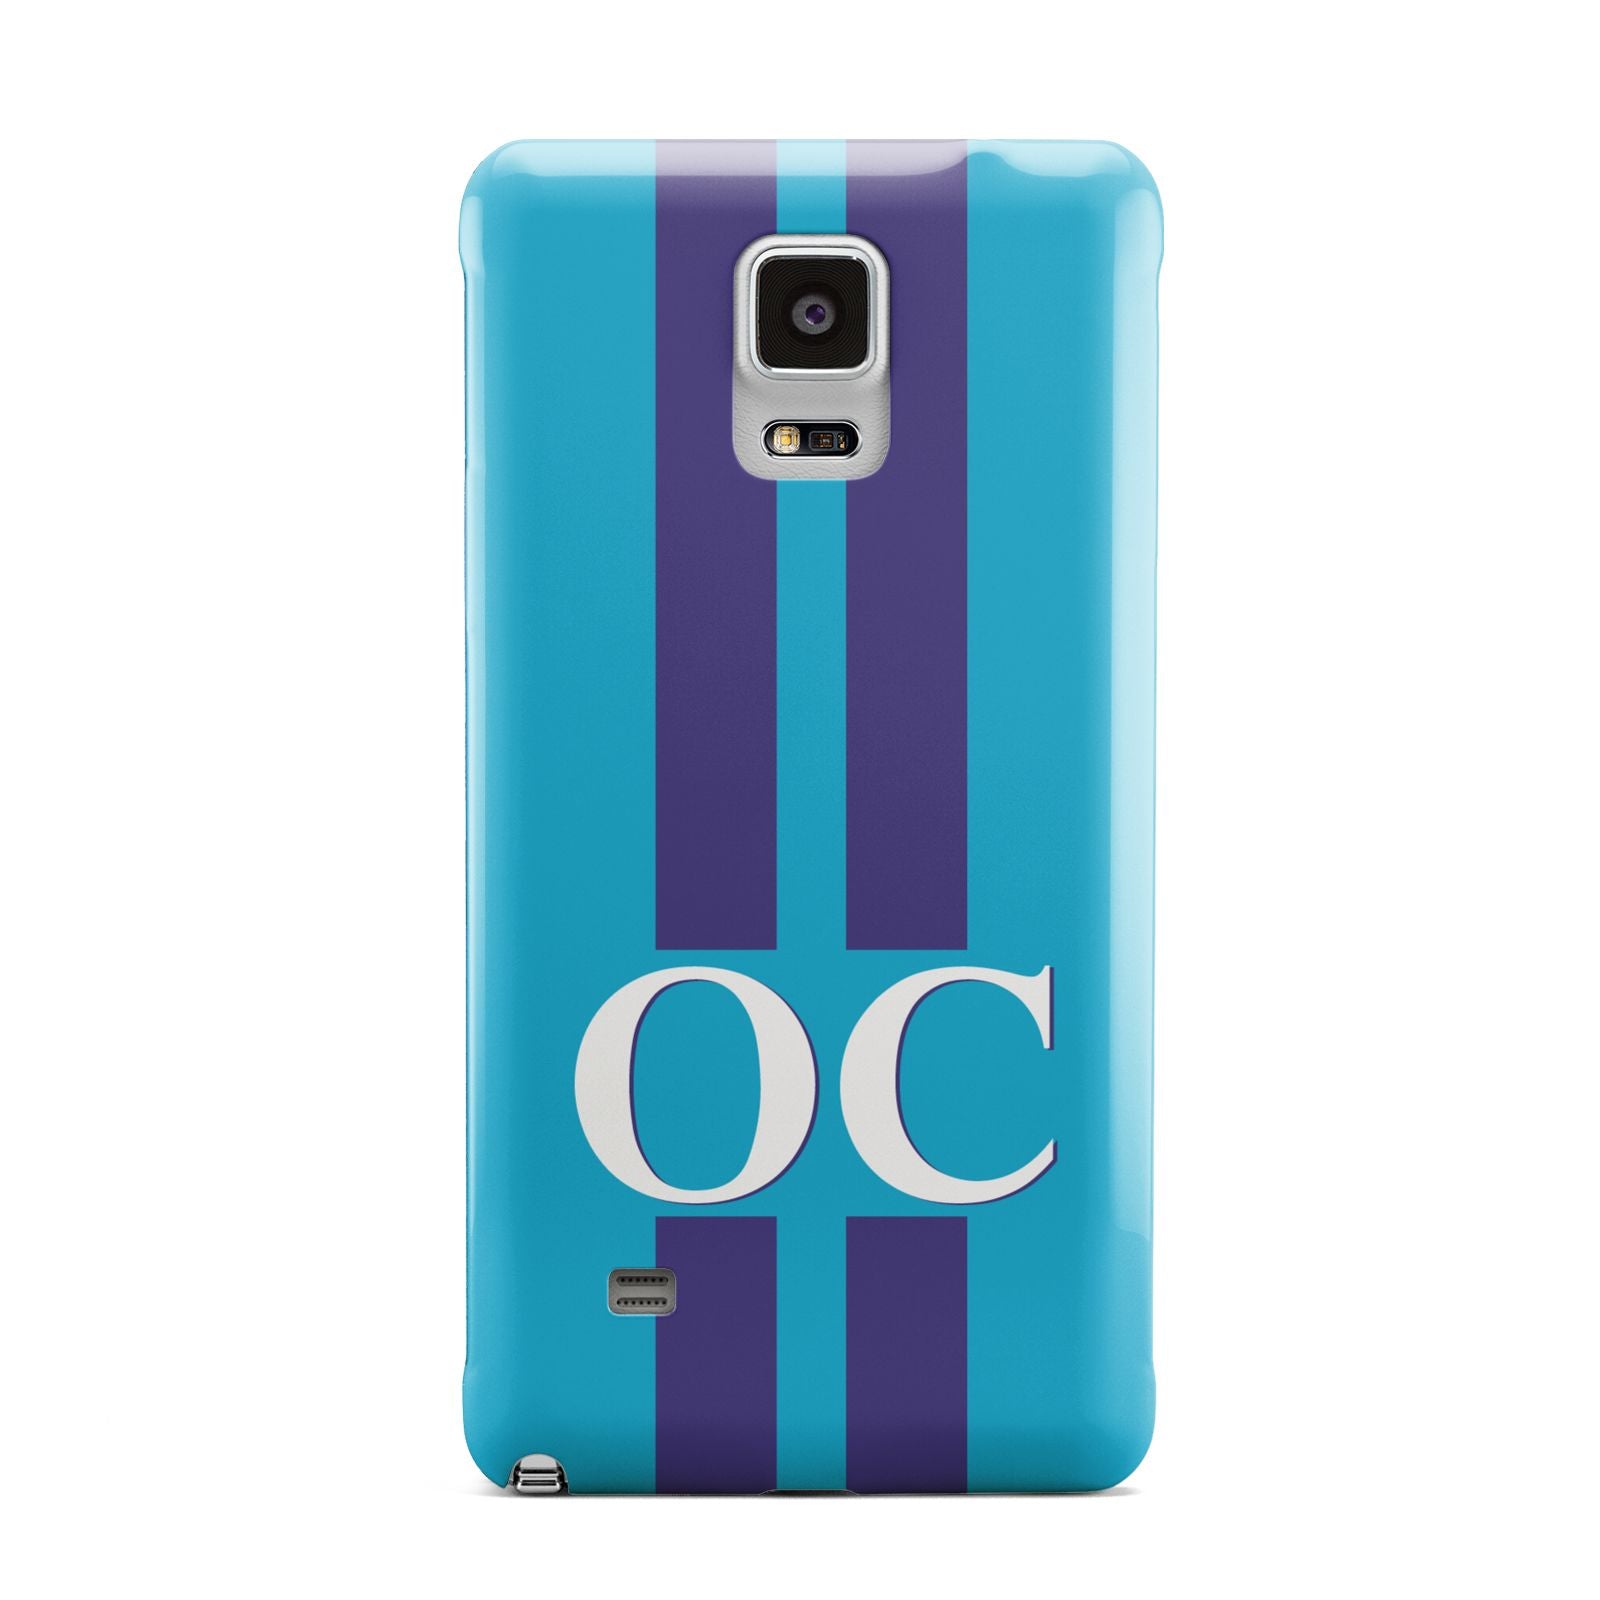 Turquoise Personalised Samsung Galaxy Note 4 Case